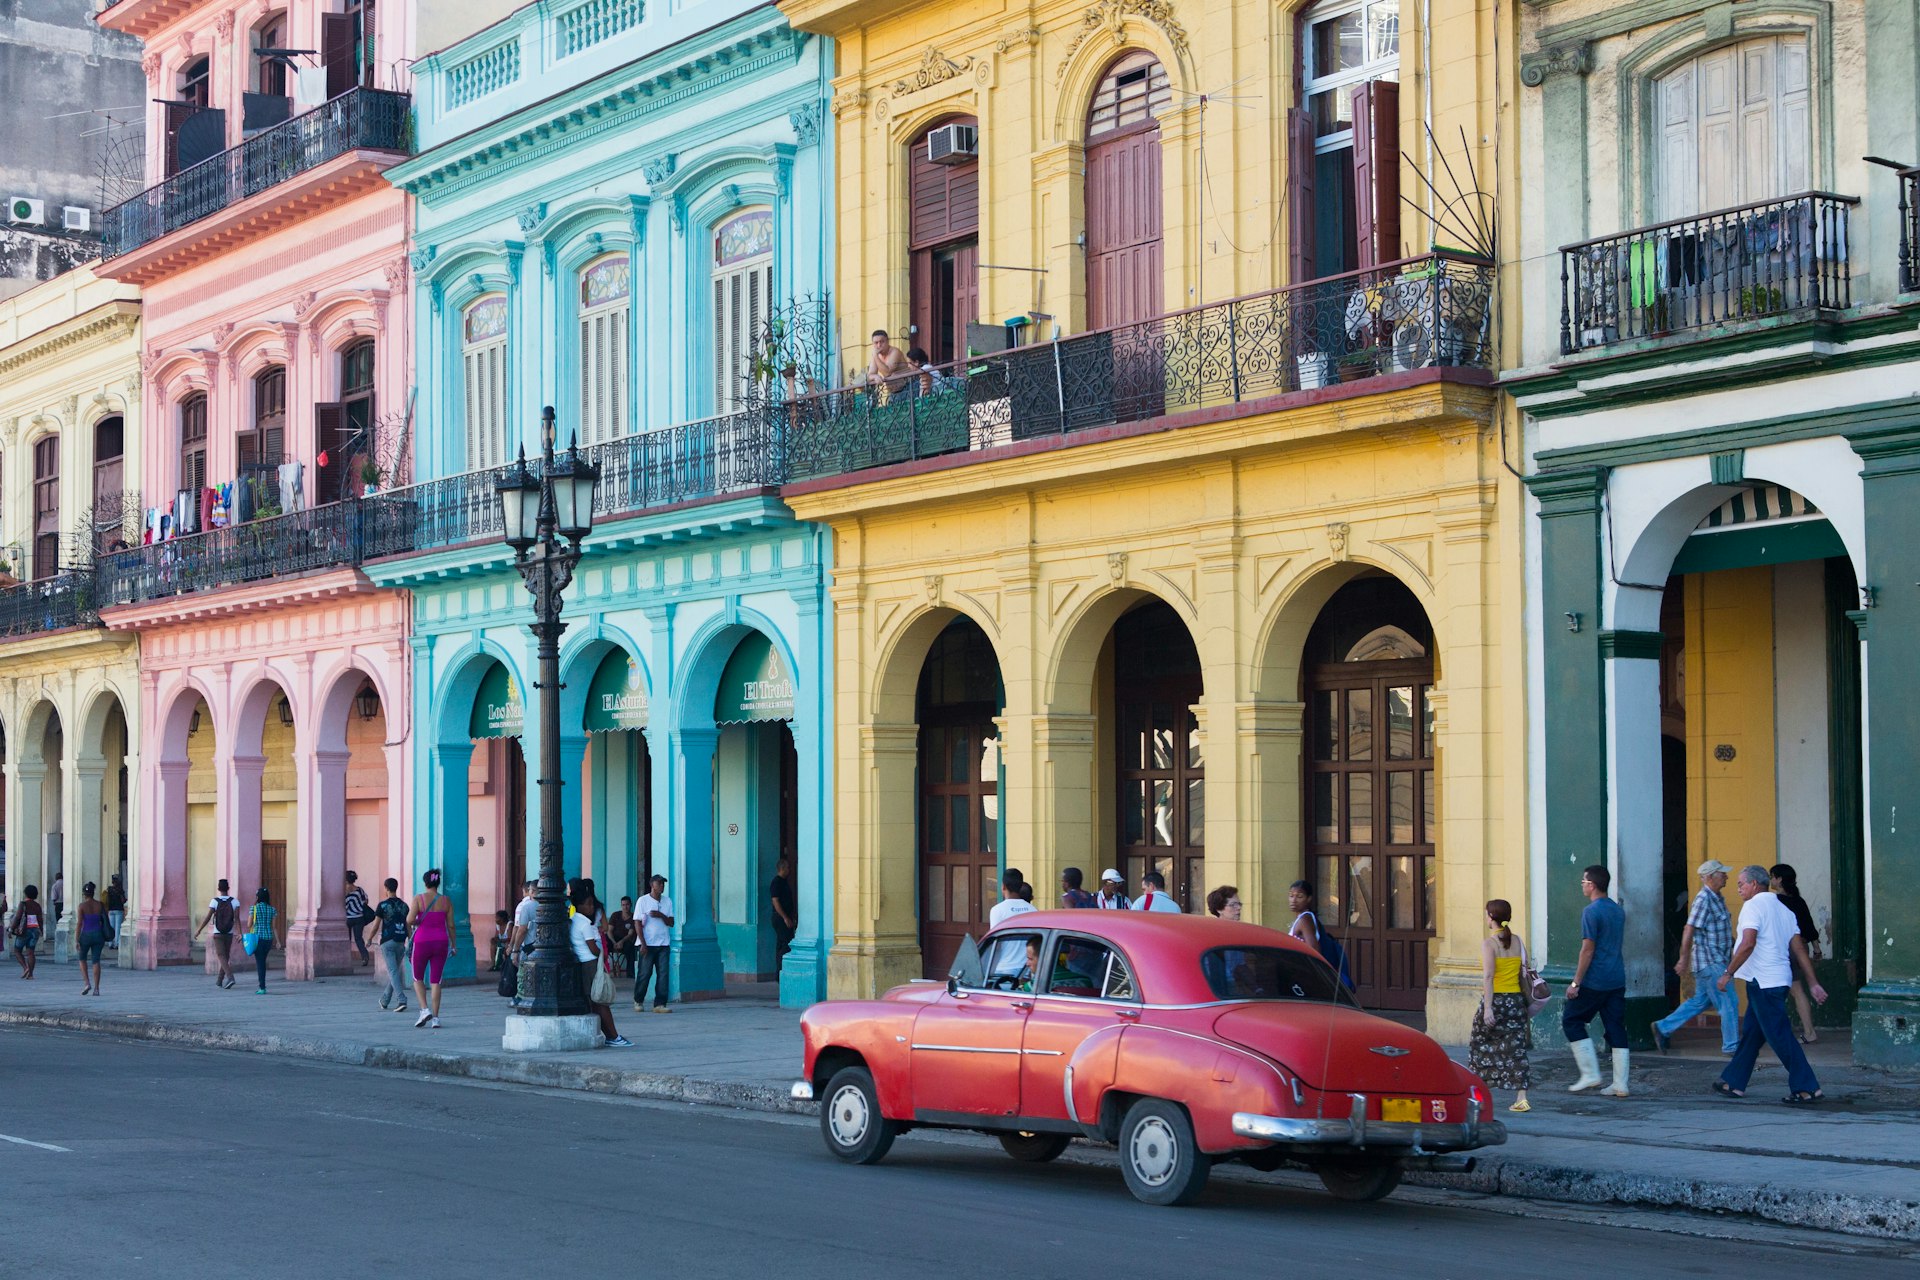 Colorful houses and an old car in Havana